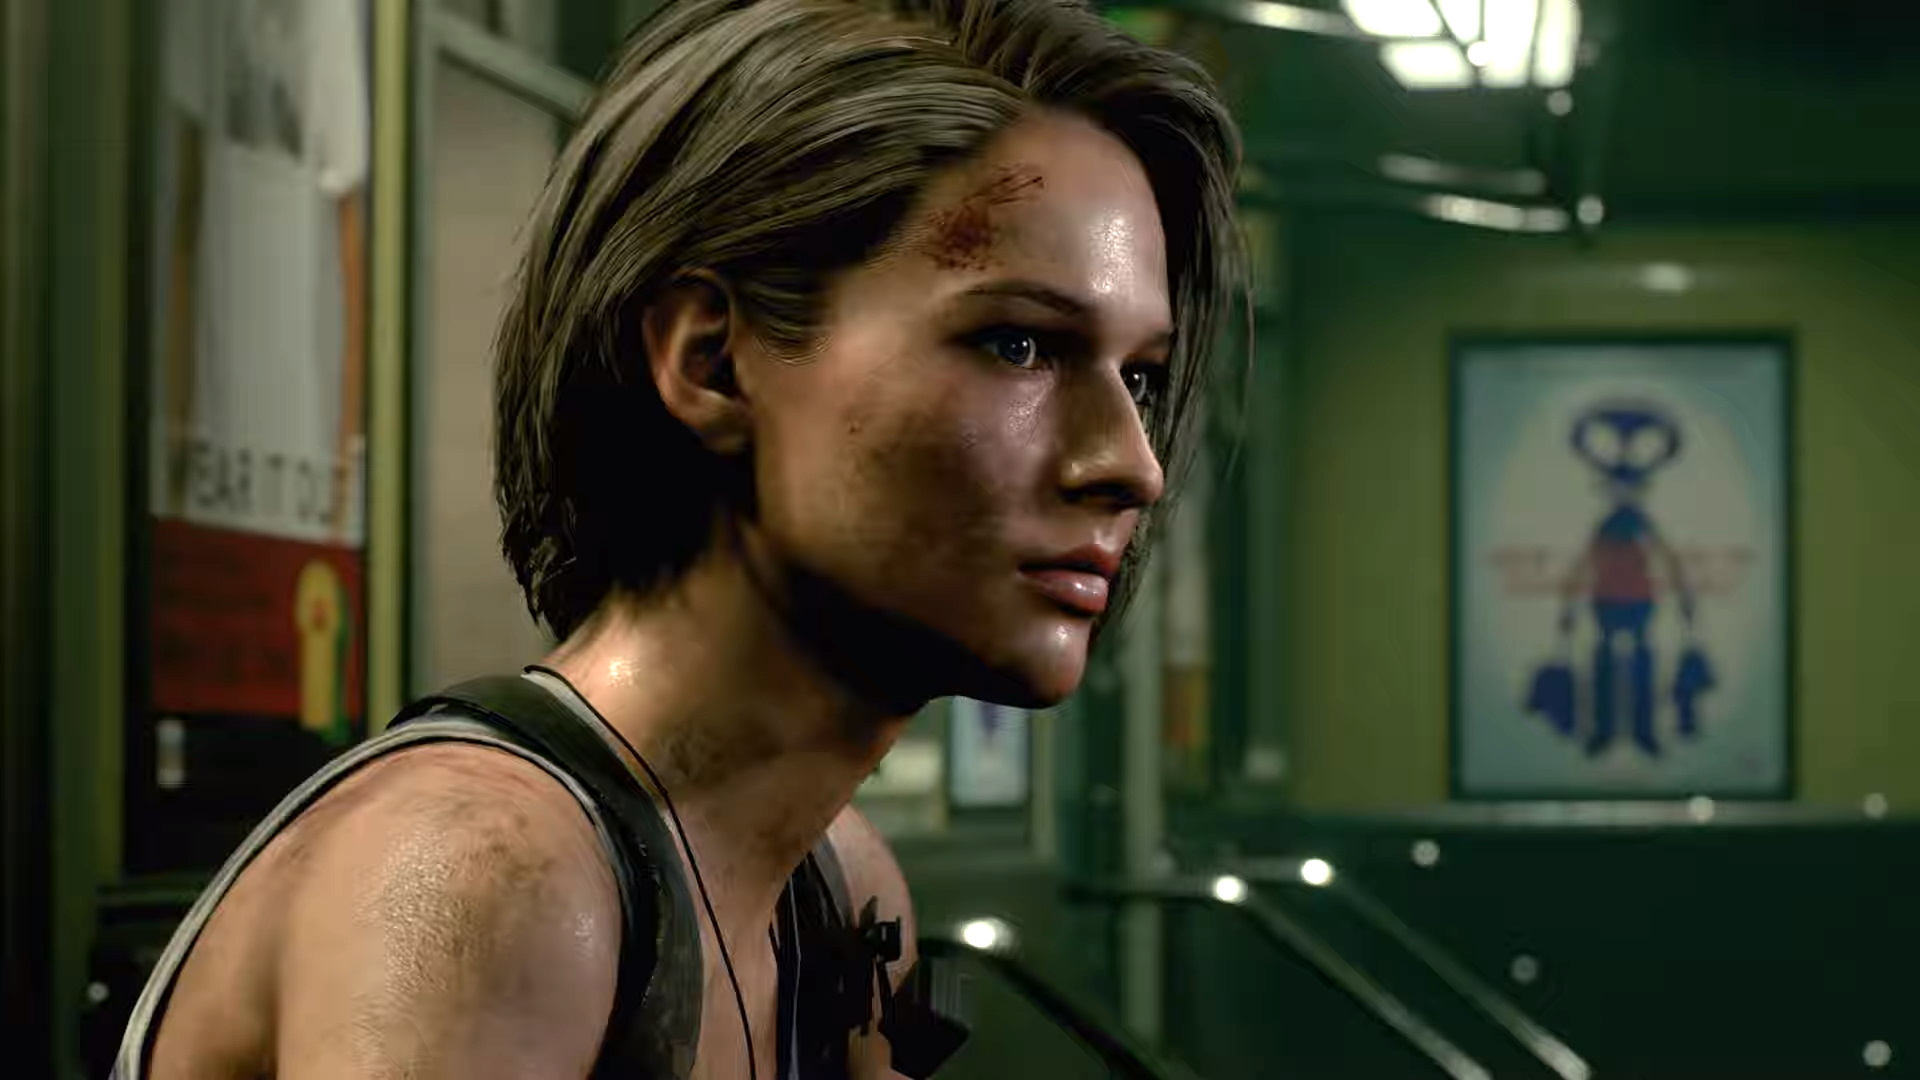 Resident Evil 3 producer explains why they redesigned Jill